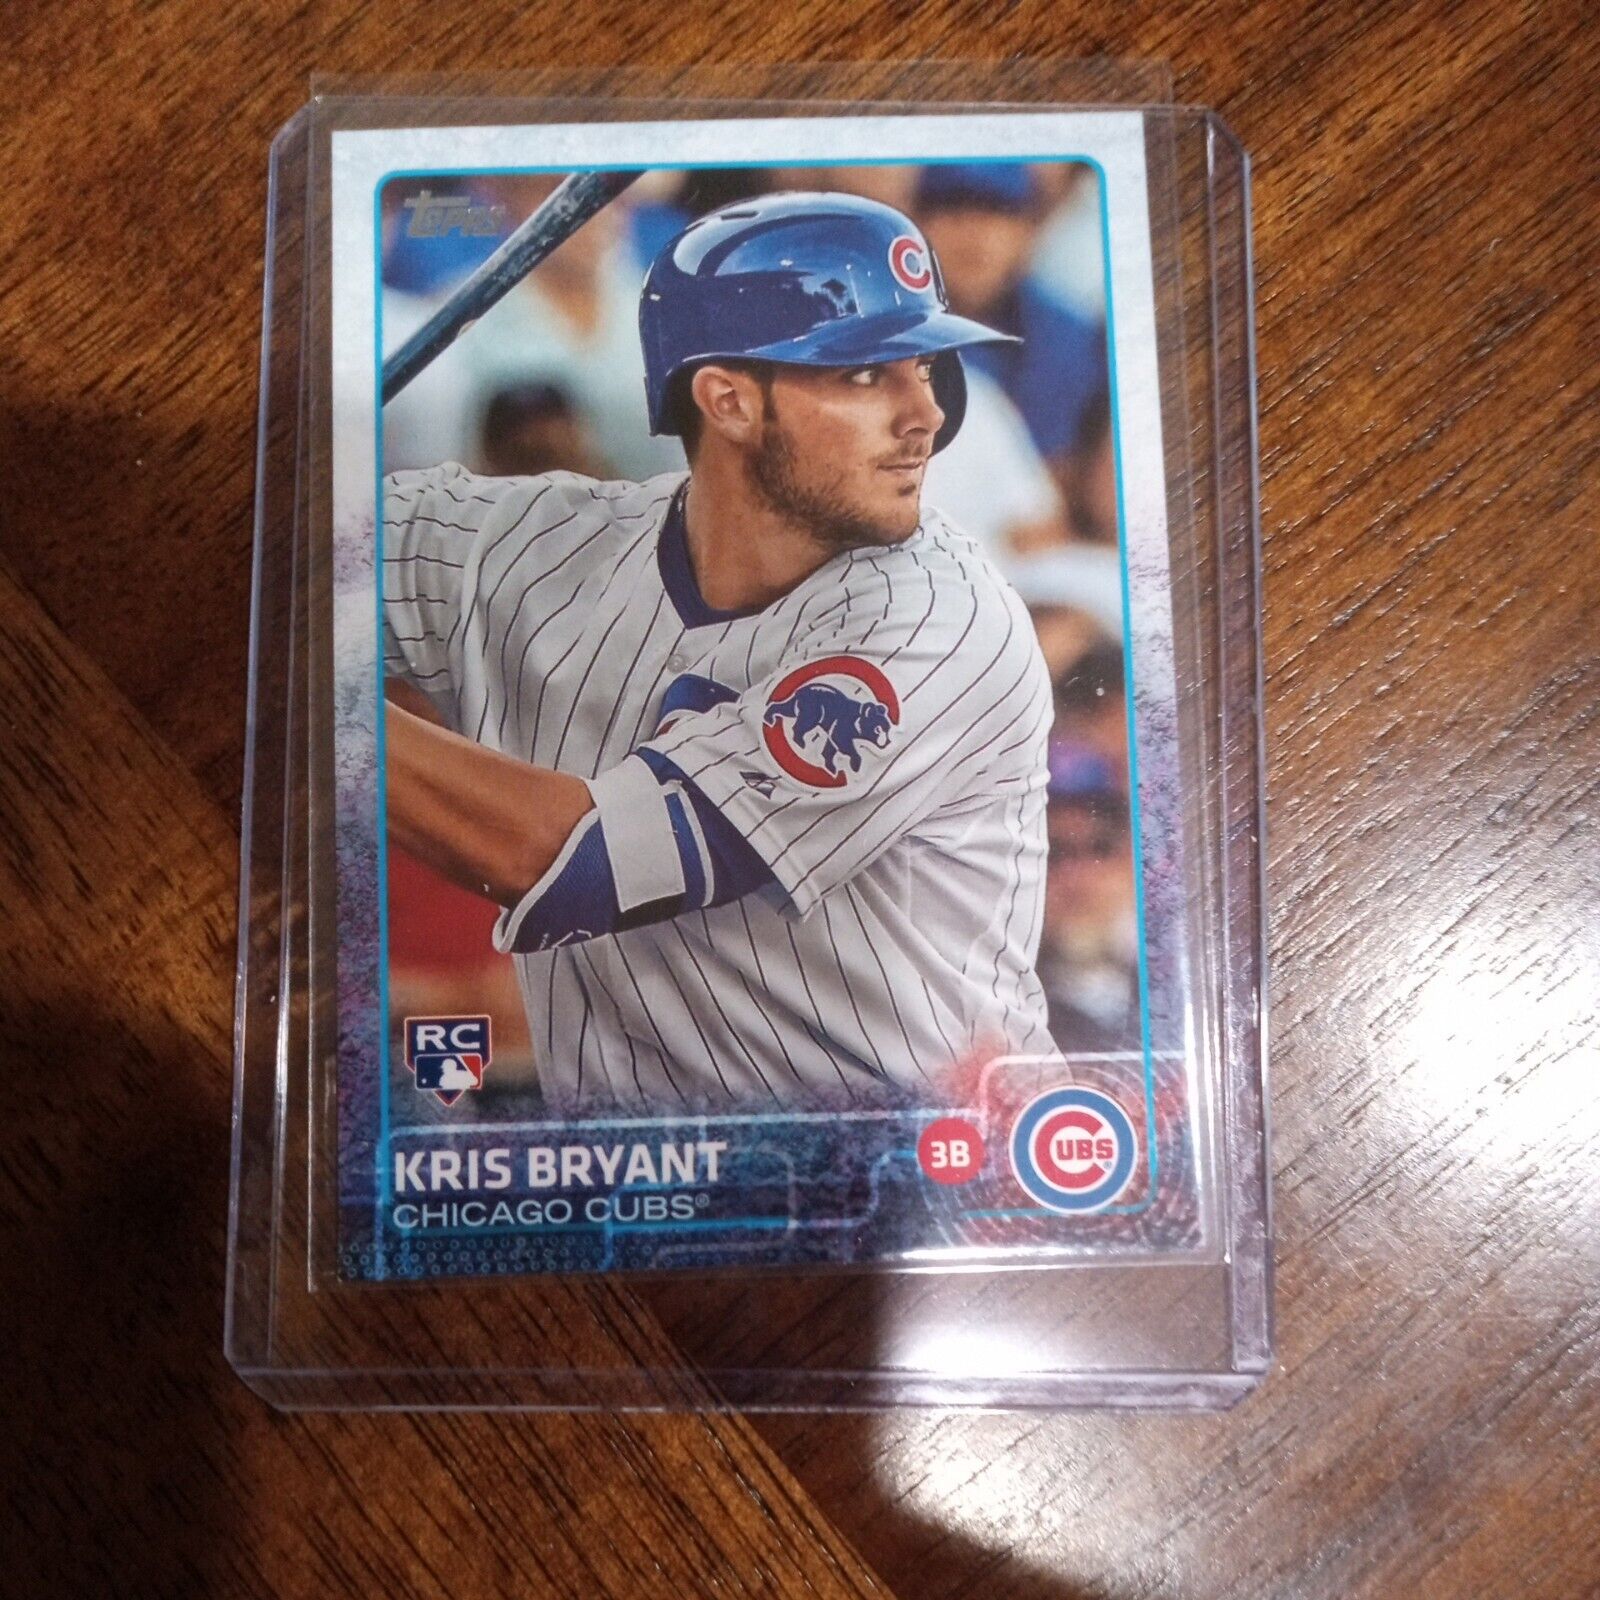 2015 Topps #616 Kris Bryant RC Rookie Chicago Cubs Baseball Card NM-MT